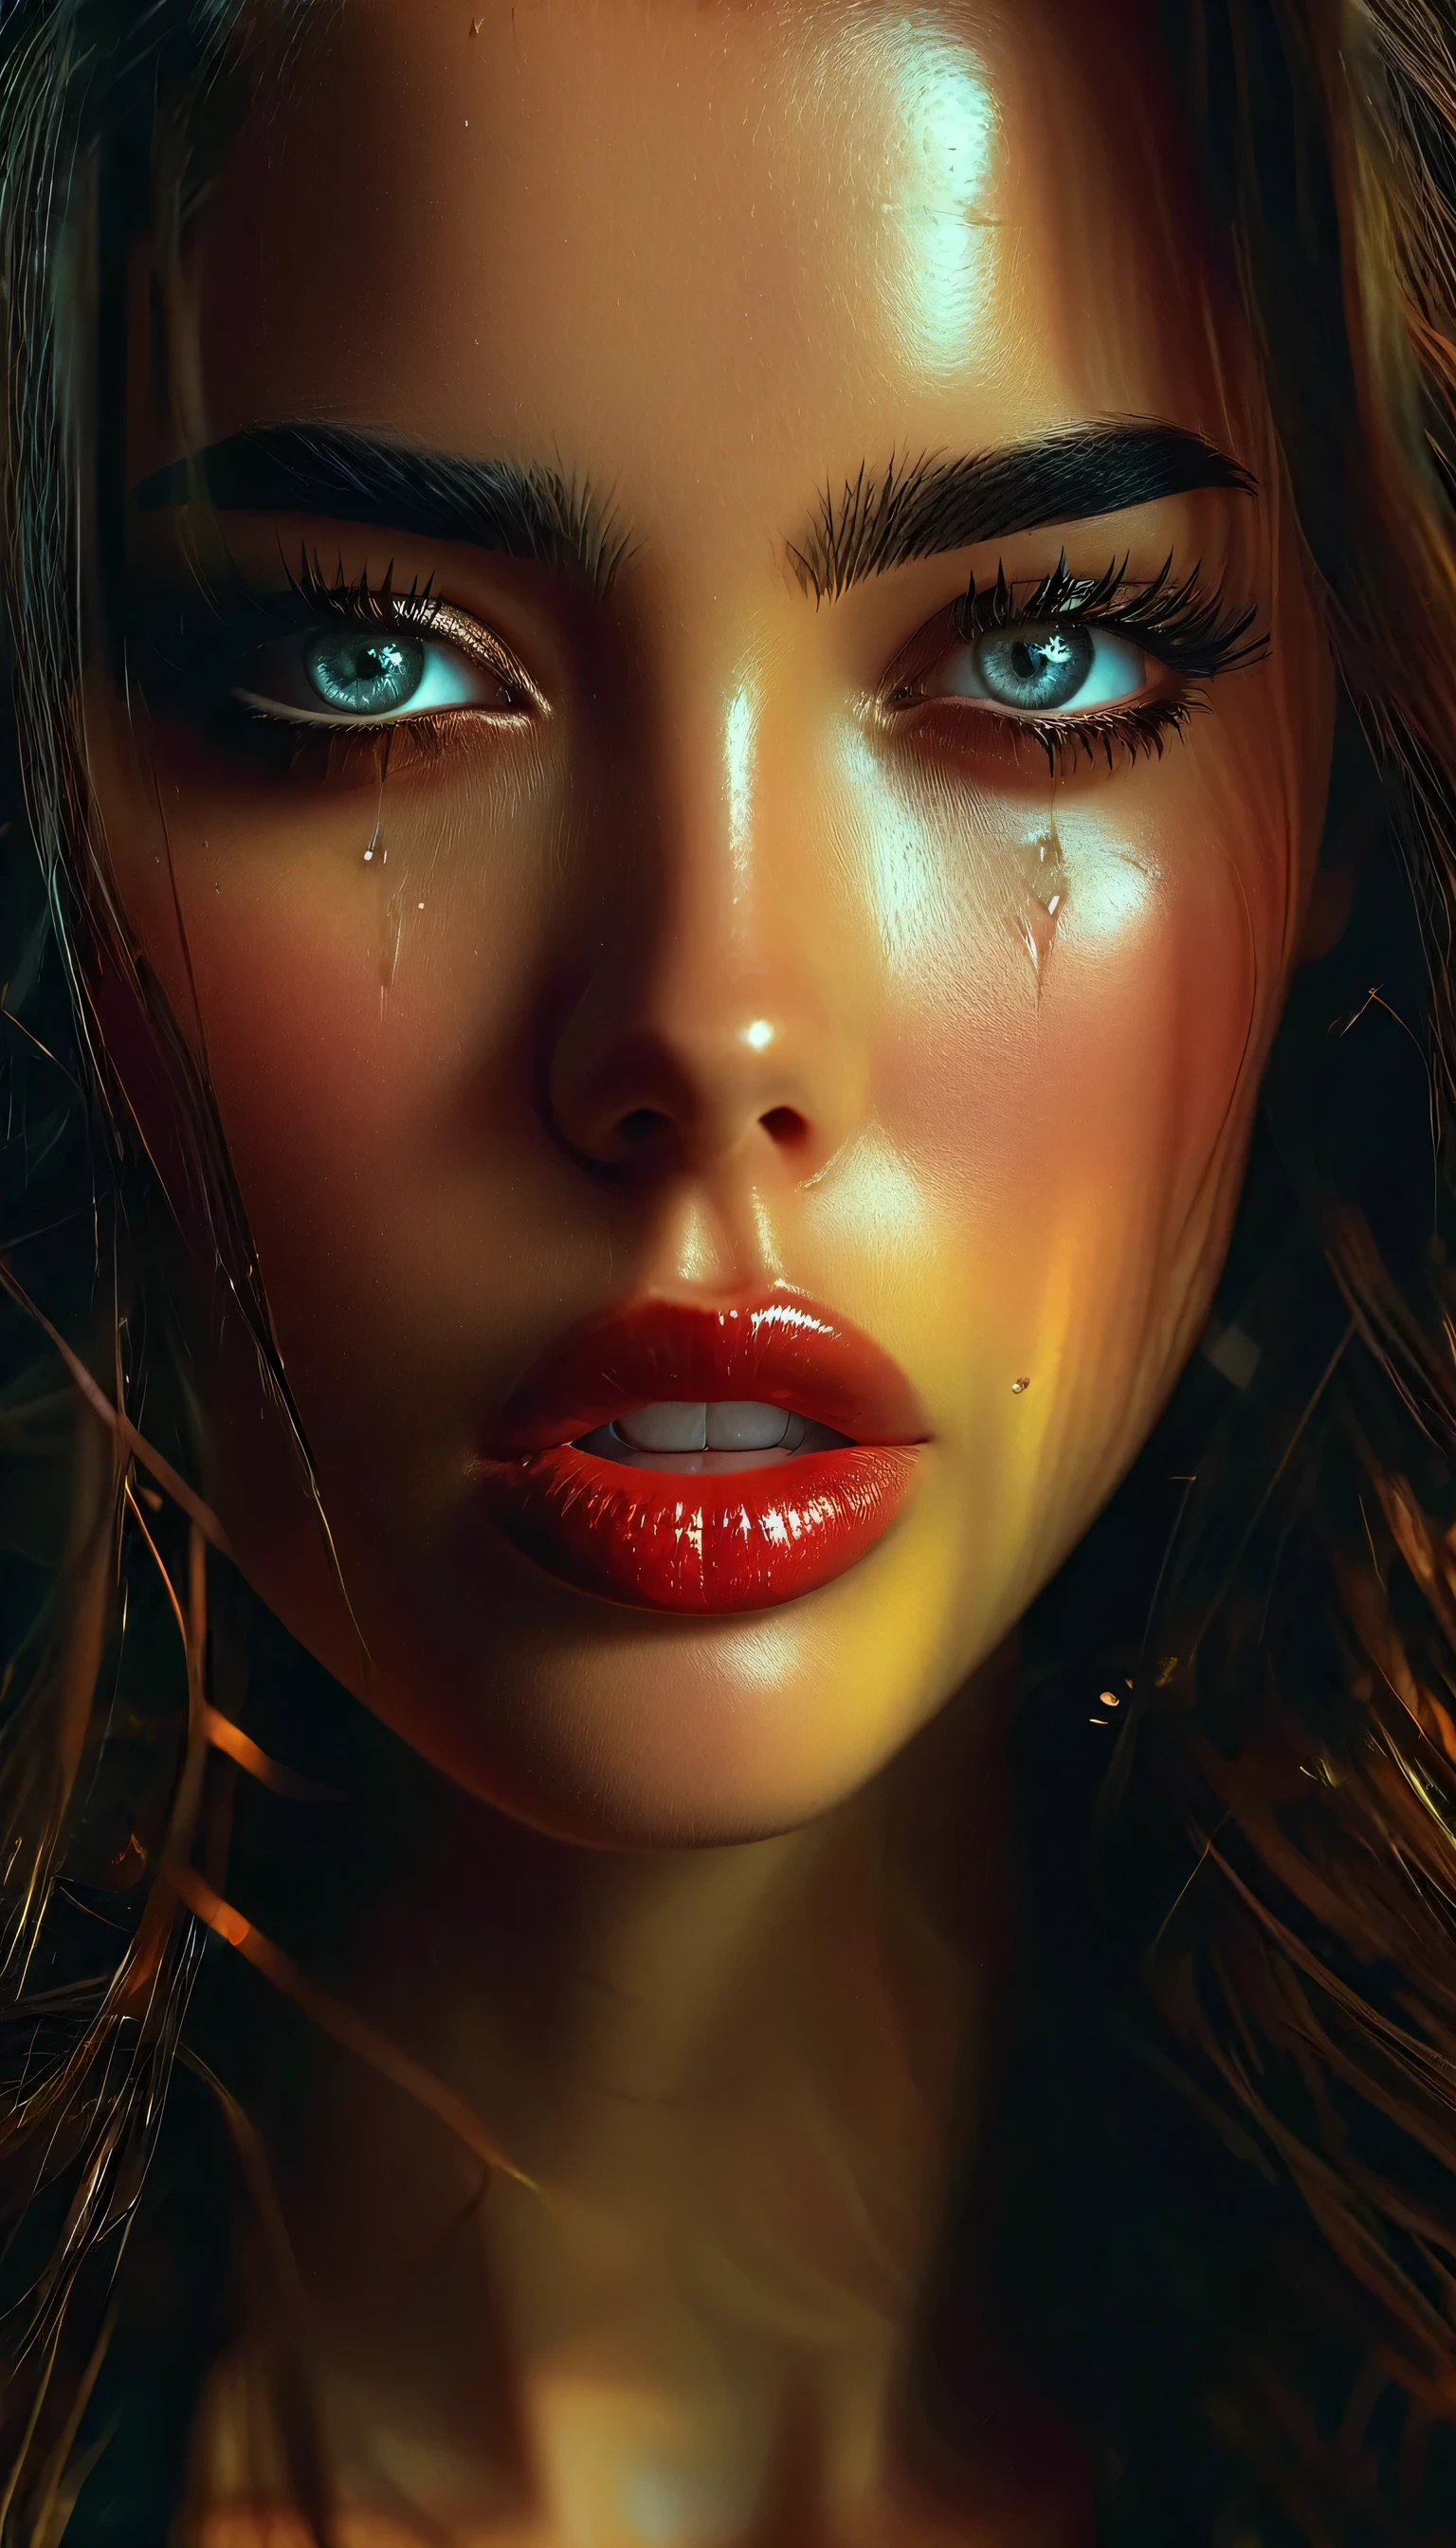 a girl with beautiful detailed eyes, beautiful detailed lips, extremely detailed eyes and face, long eyelashes, realistic, photorealistic, photo-realistic, 4k, 8k, highres, masterpiece, ultra-detailed, realistic lighting, melancholy expression, tears in her eyes, vulnerable, hopeful, dramatic lighting, cinematic, chiaroscuro lighting, moody, emotional, introspective, pensive, isolation, loneliness, fear of the unknown, glimmer of hope, depression, emotional, dramatic, painterly, oil painting, digital art, muted colors, somber colors, dark colors, warm lighting, ray of light, cinematic composition